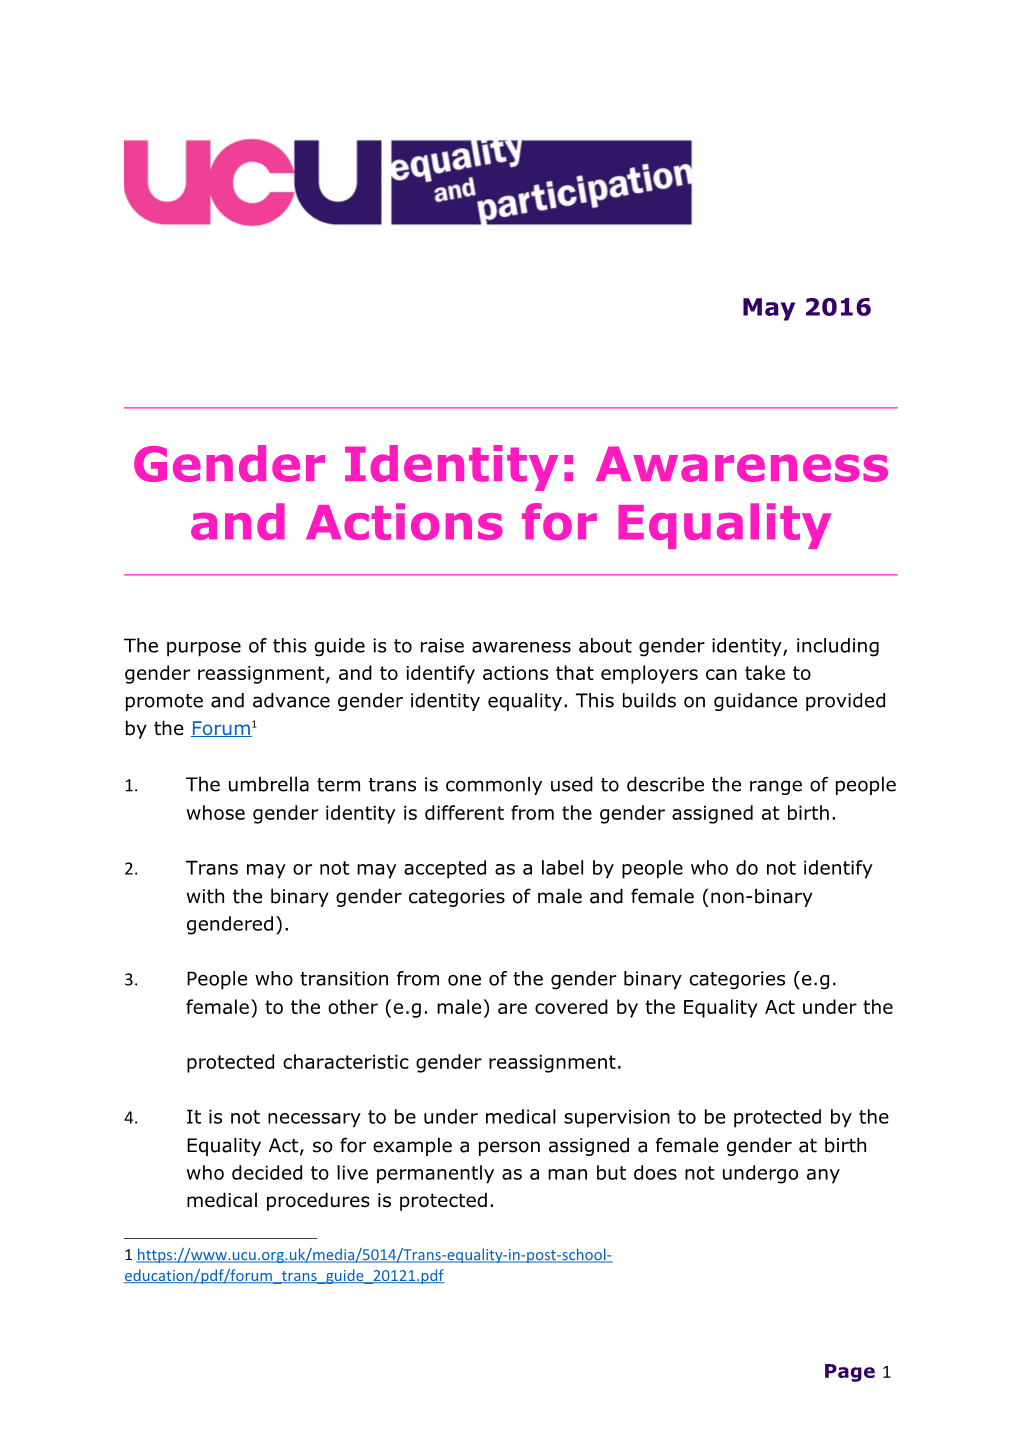 Gender Identity: Awareness and Actions for Equality